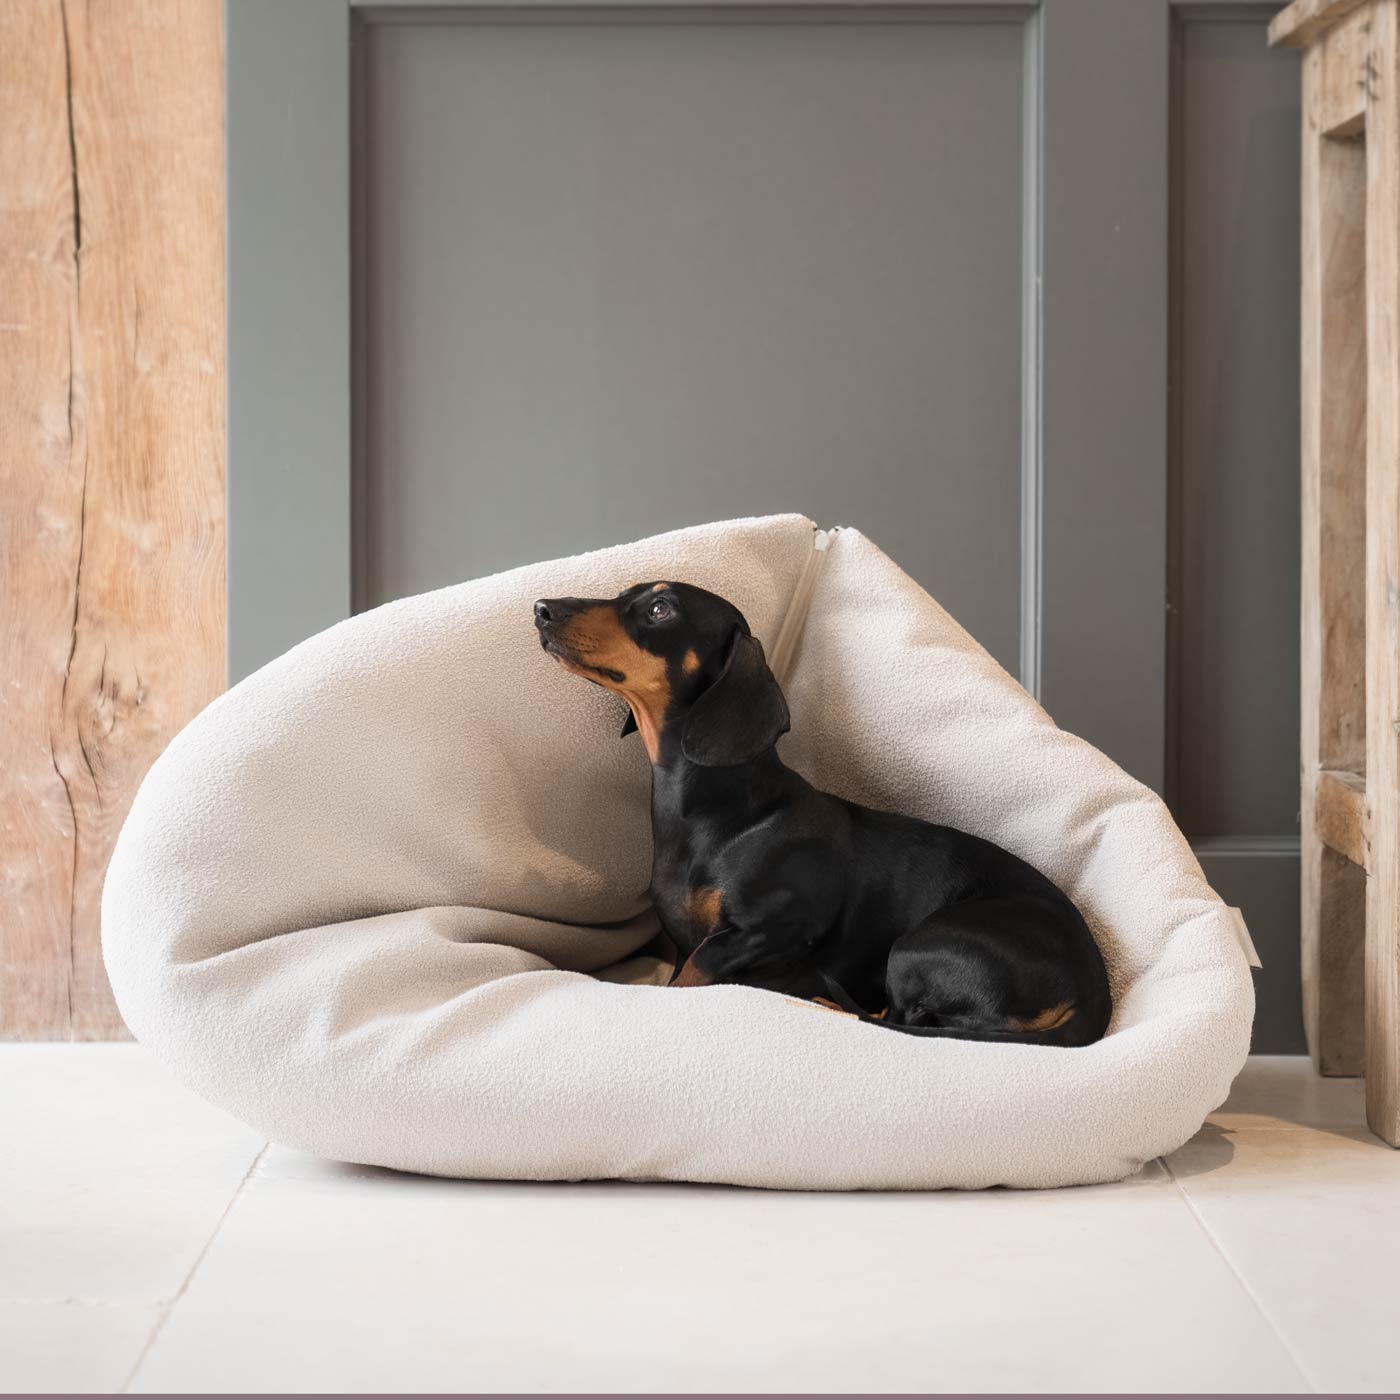 Luxury Dog Cushions & Beds, Squash 'Em in Alabaster, The Perfect Snuggly Cave For Dogs To Burrow! Available Now at Lords & Labradors